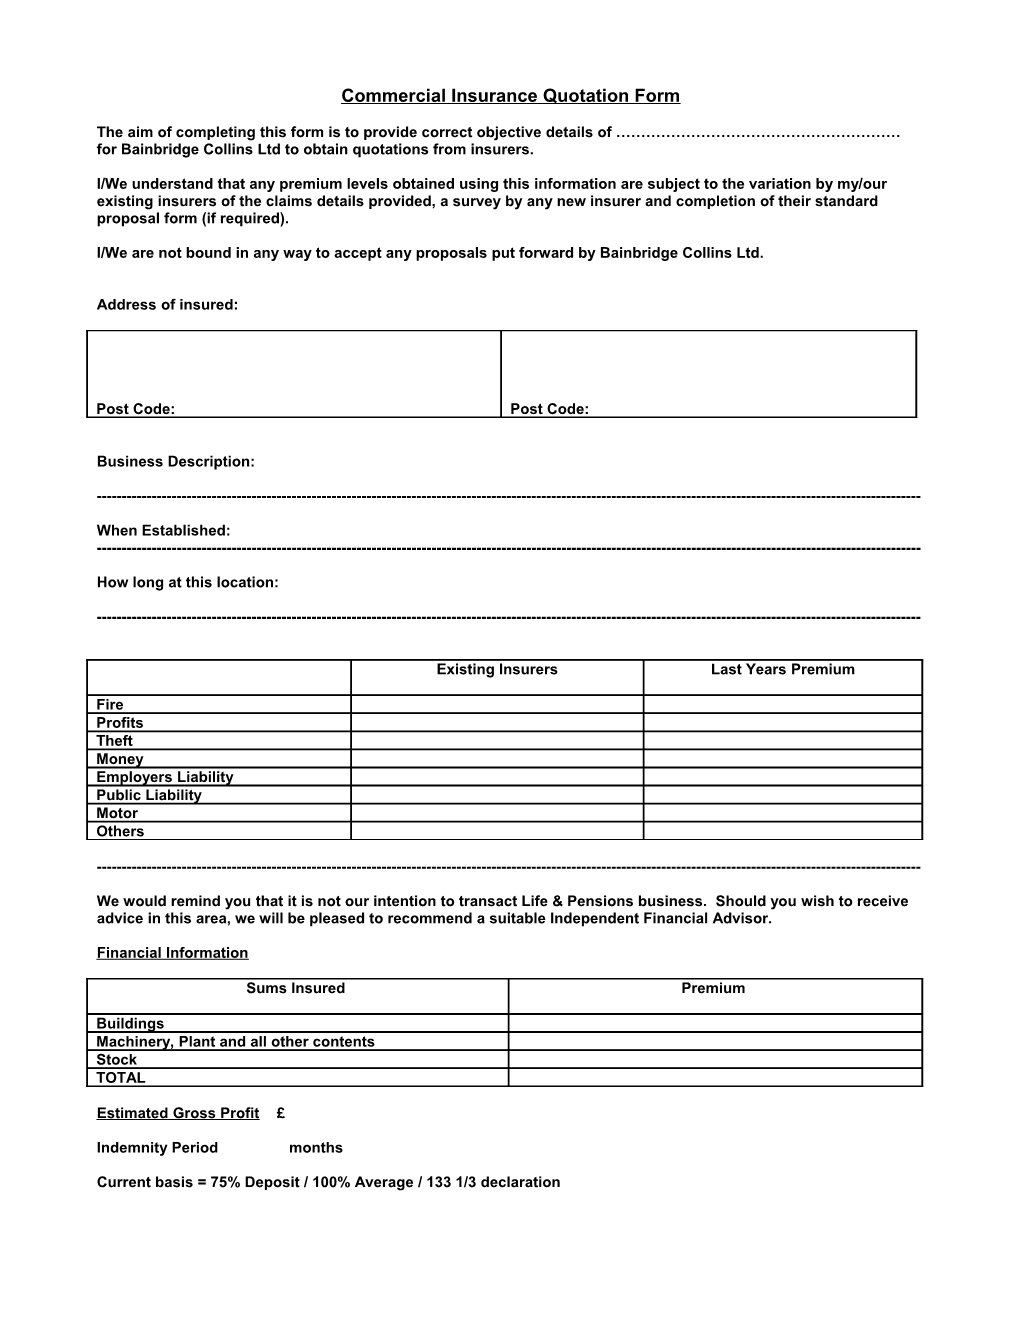 Commercial Insurance Quotation Form